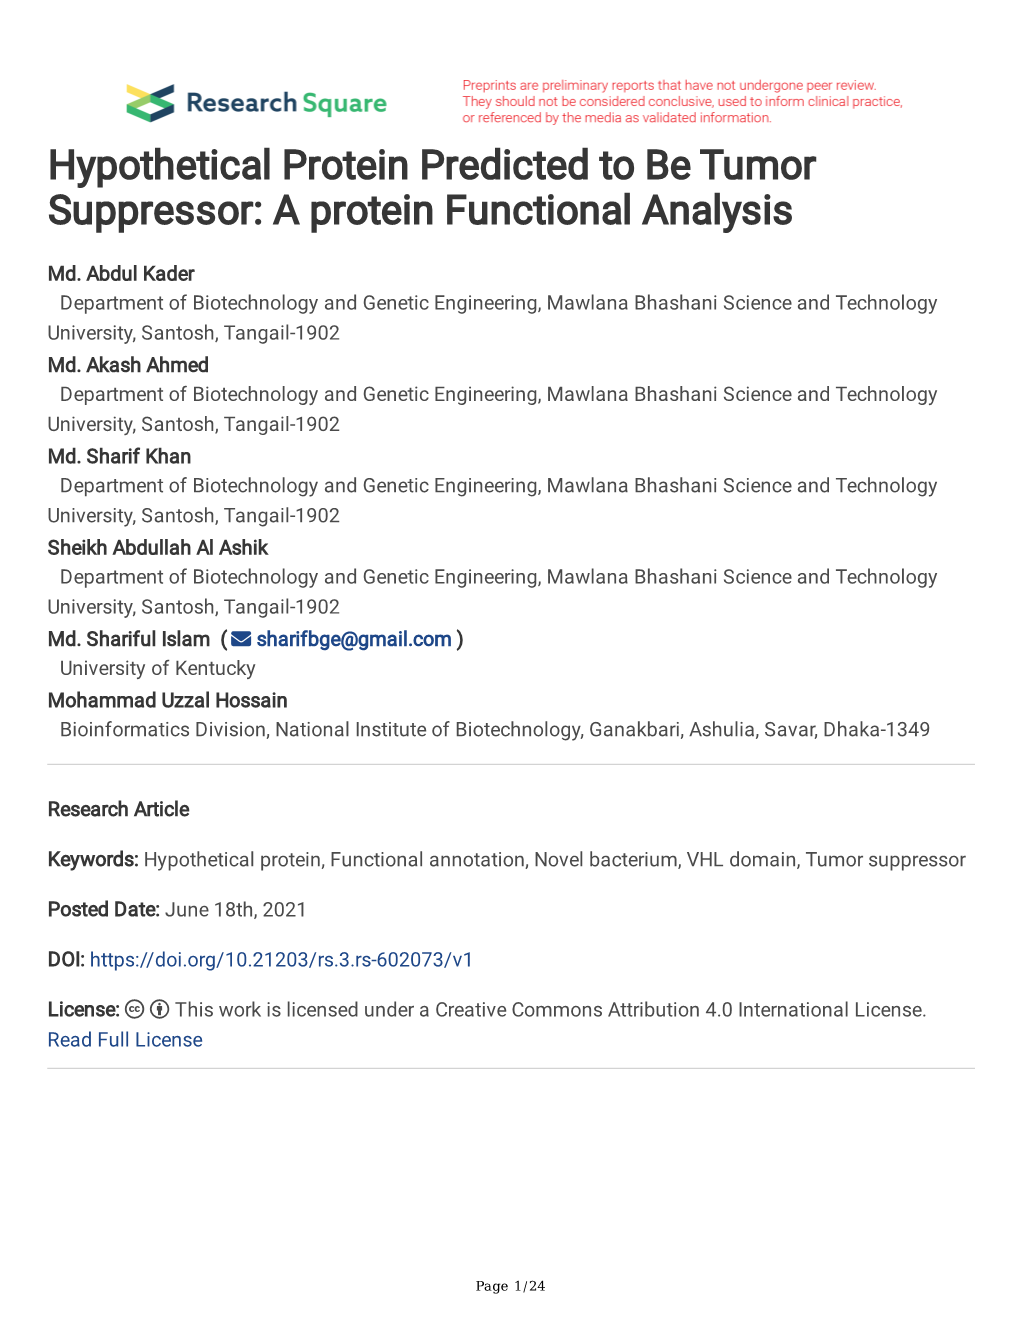 Hypothetical Protein Predicted to Be Tumor Suppressor: a Protein Functional Analysis